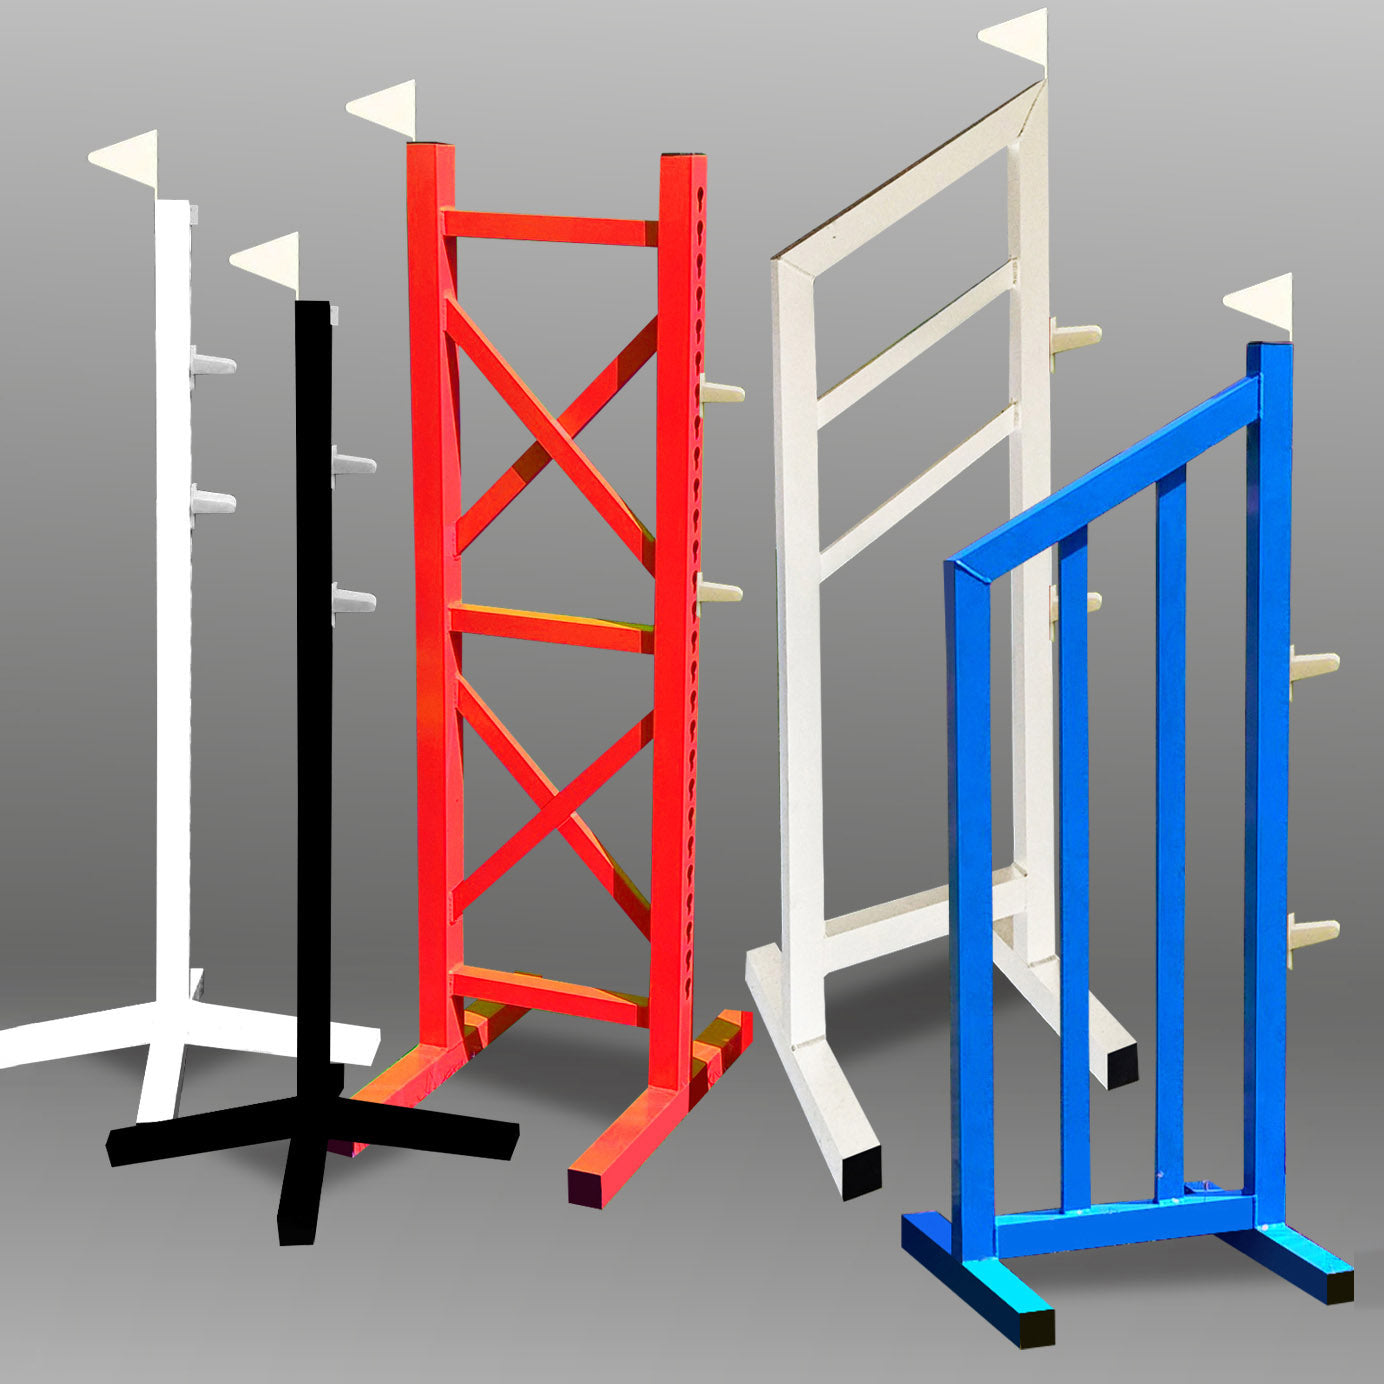 One Alu Single Stand in Red, one in Blue, One Alu double standard in Black, one in White